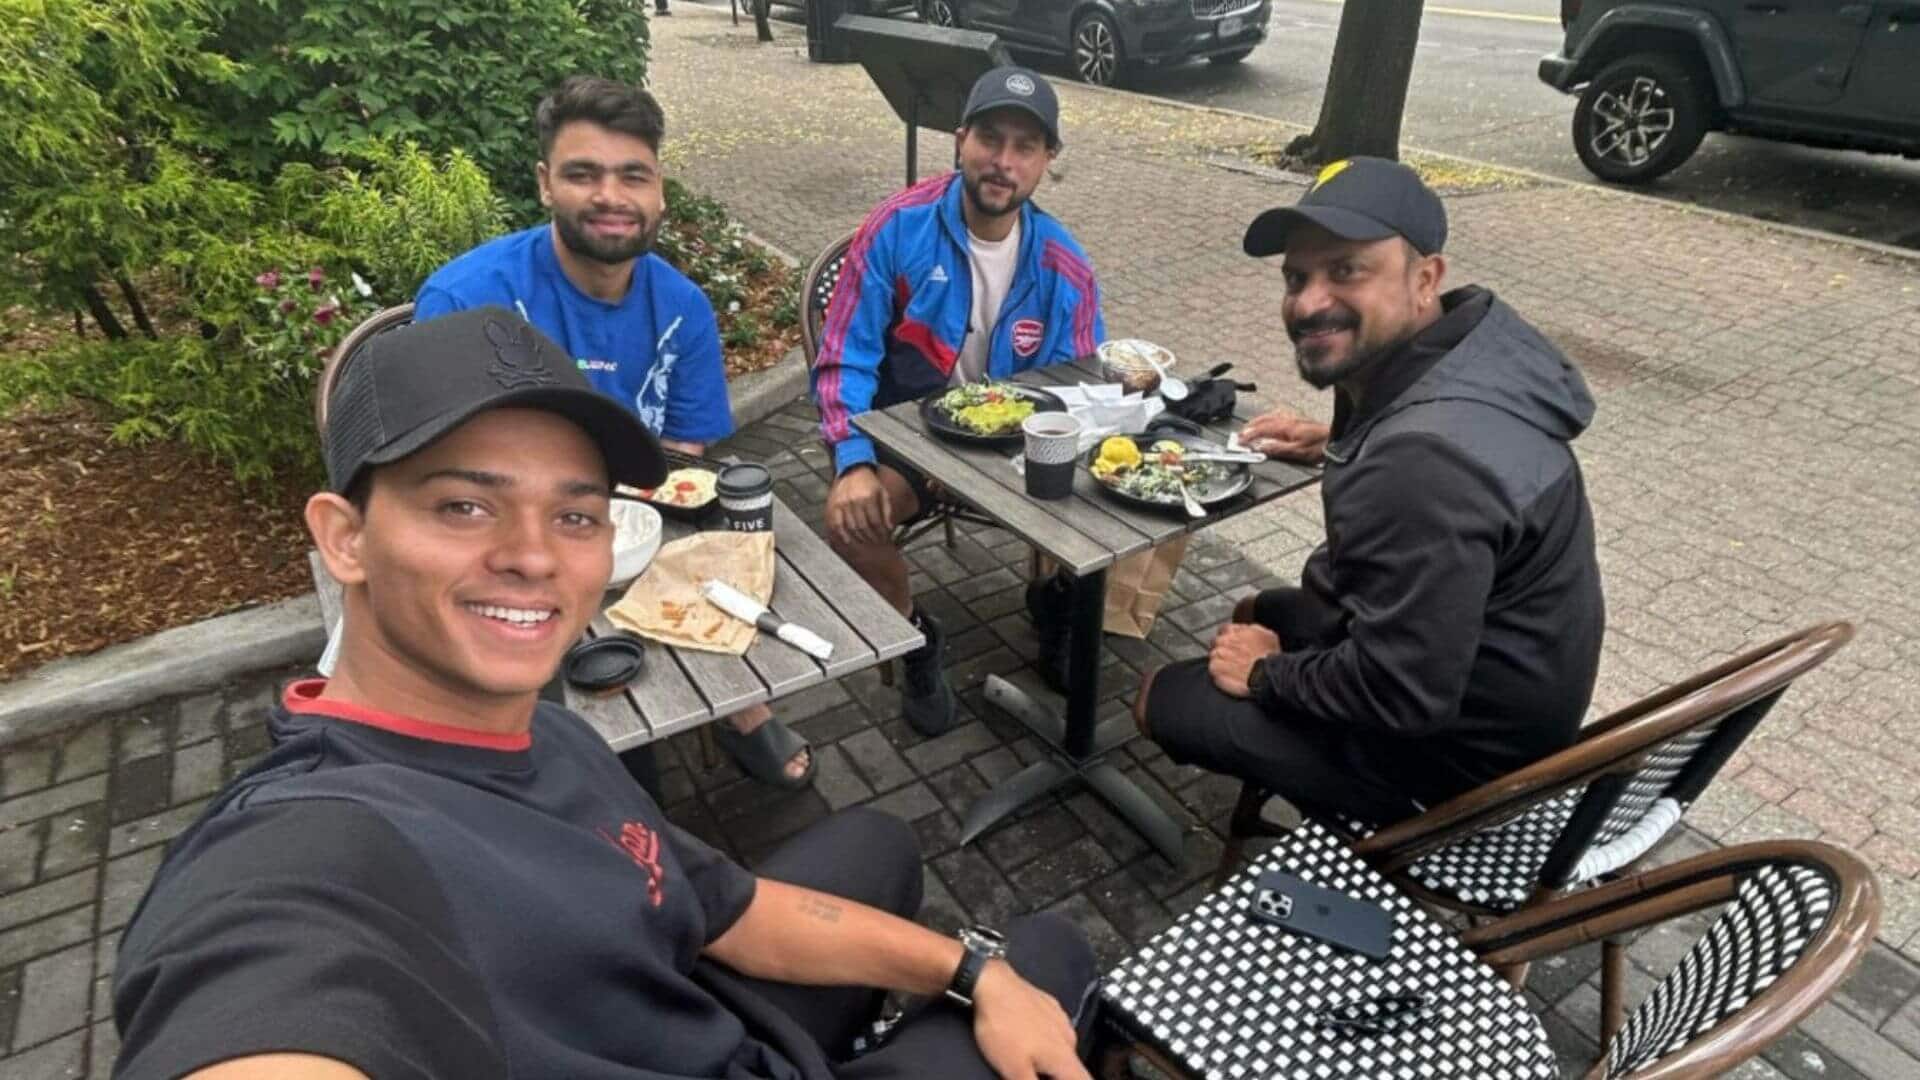 Indian players enjoy breakfast in USA ahead of T20 WC (X.com)